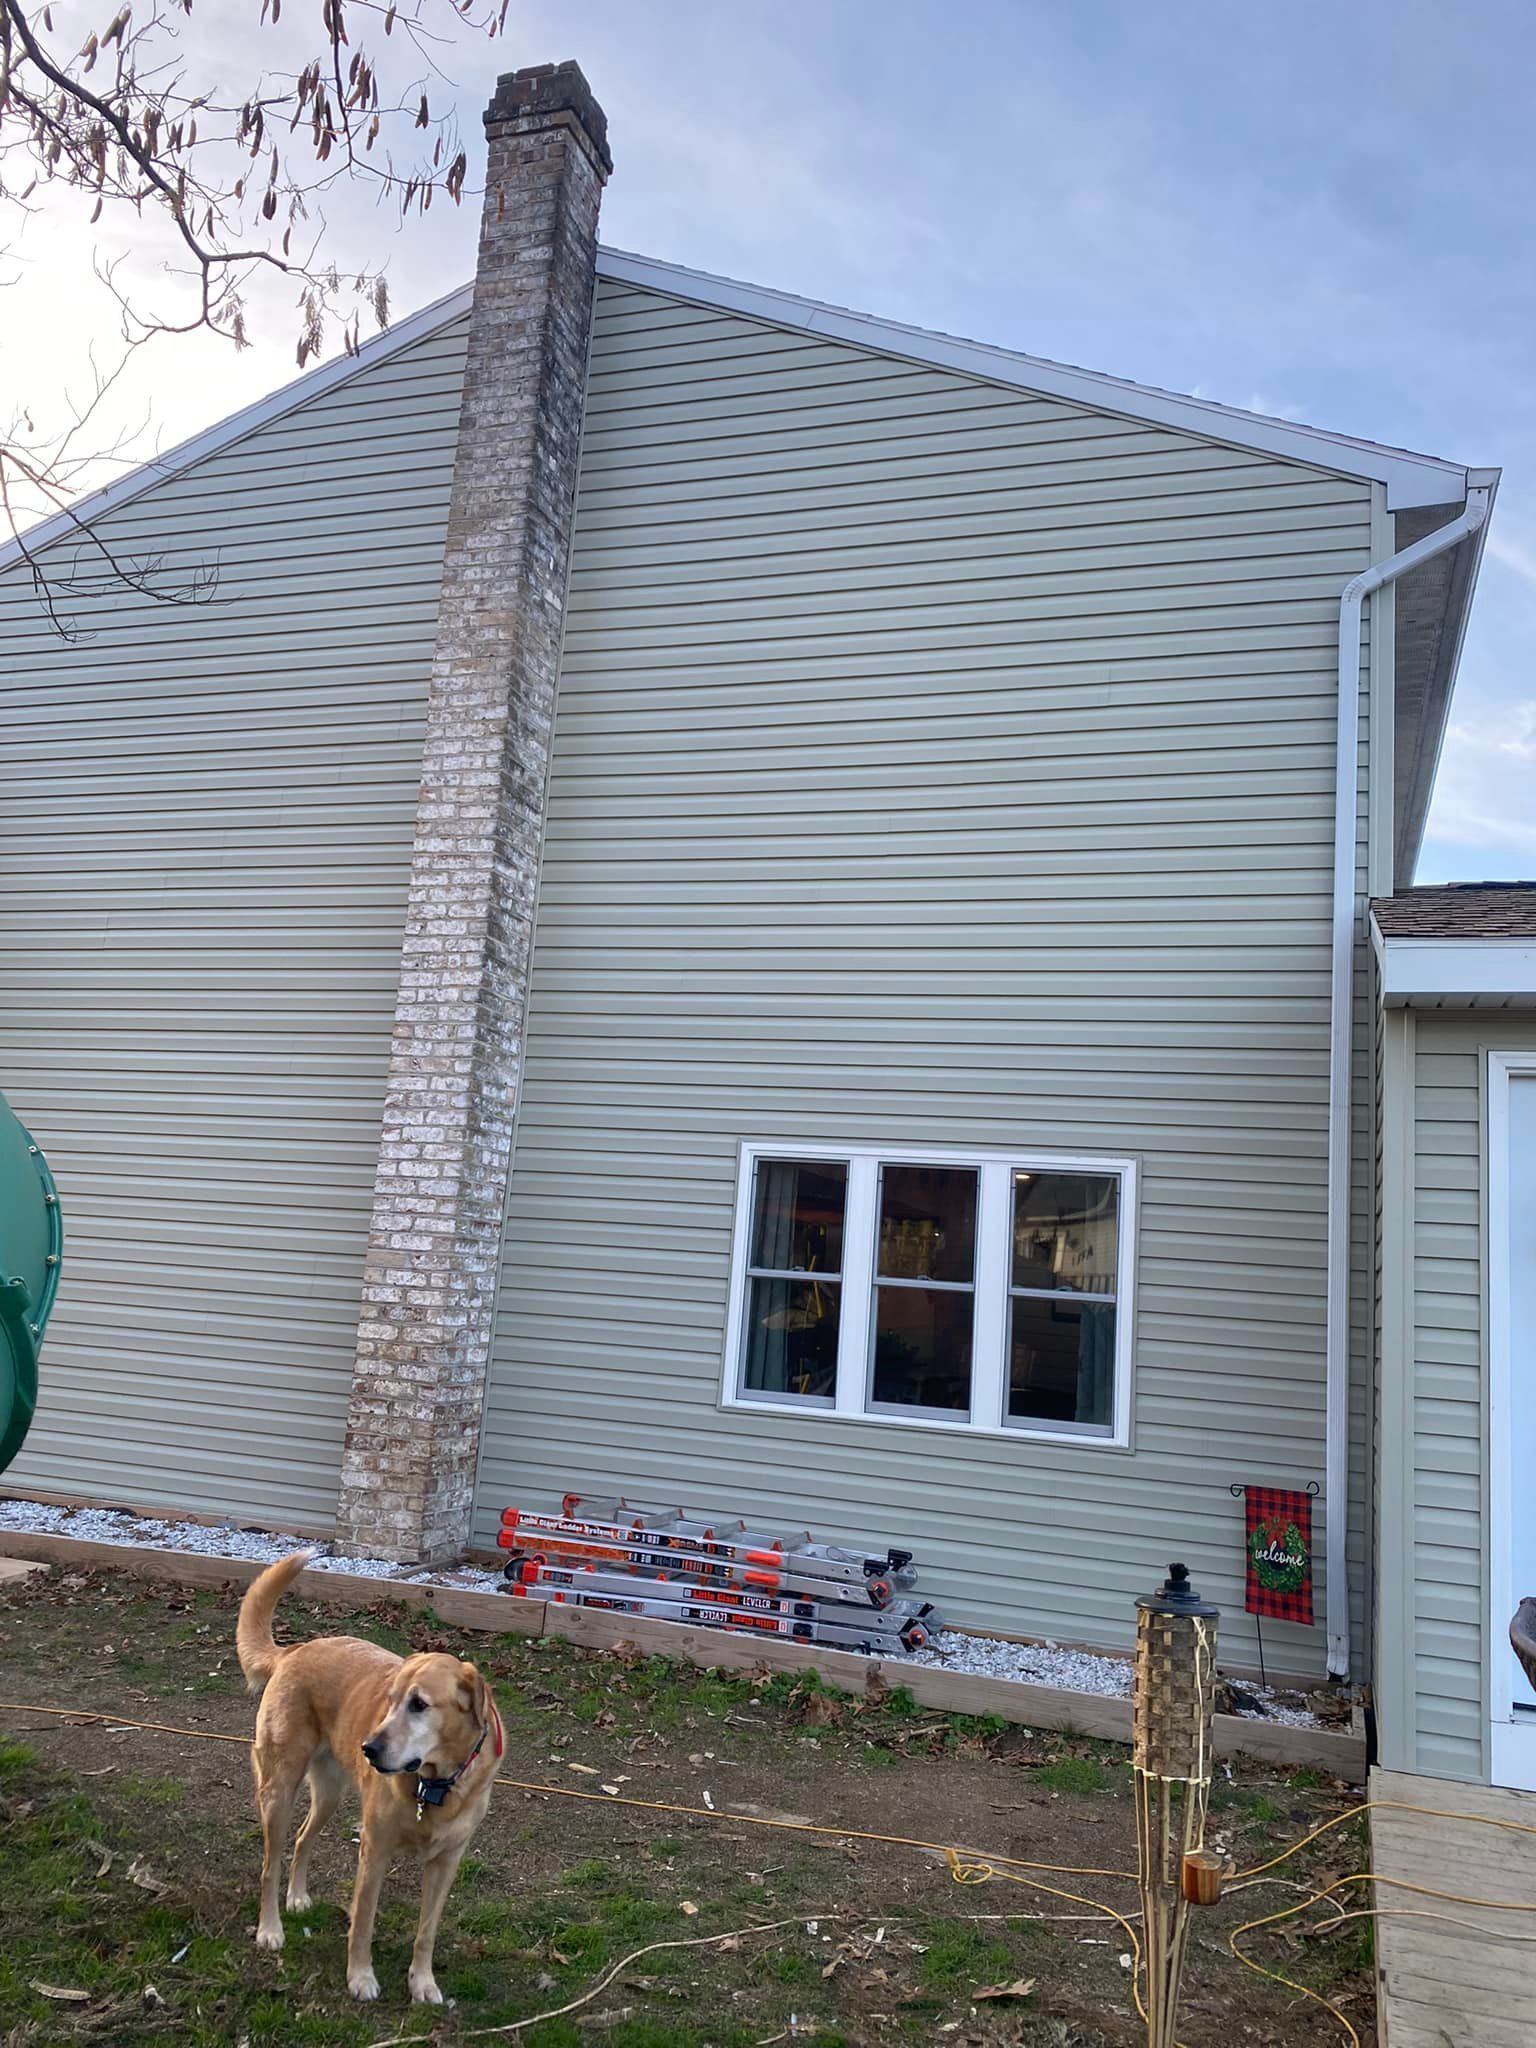 A dog is standing in front of a house with a chimney